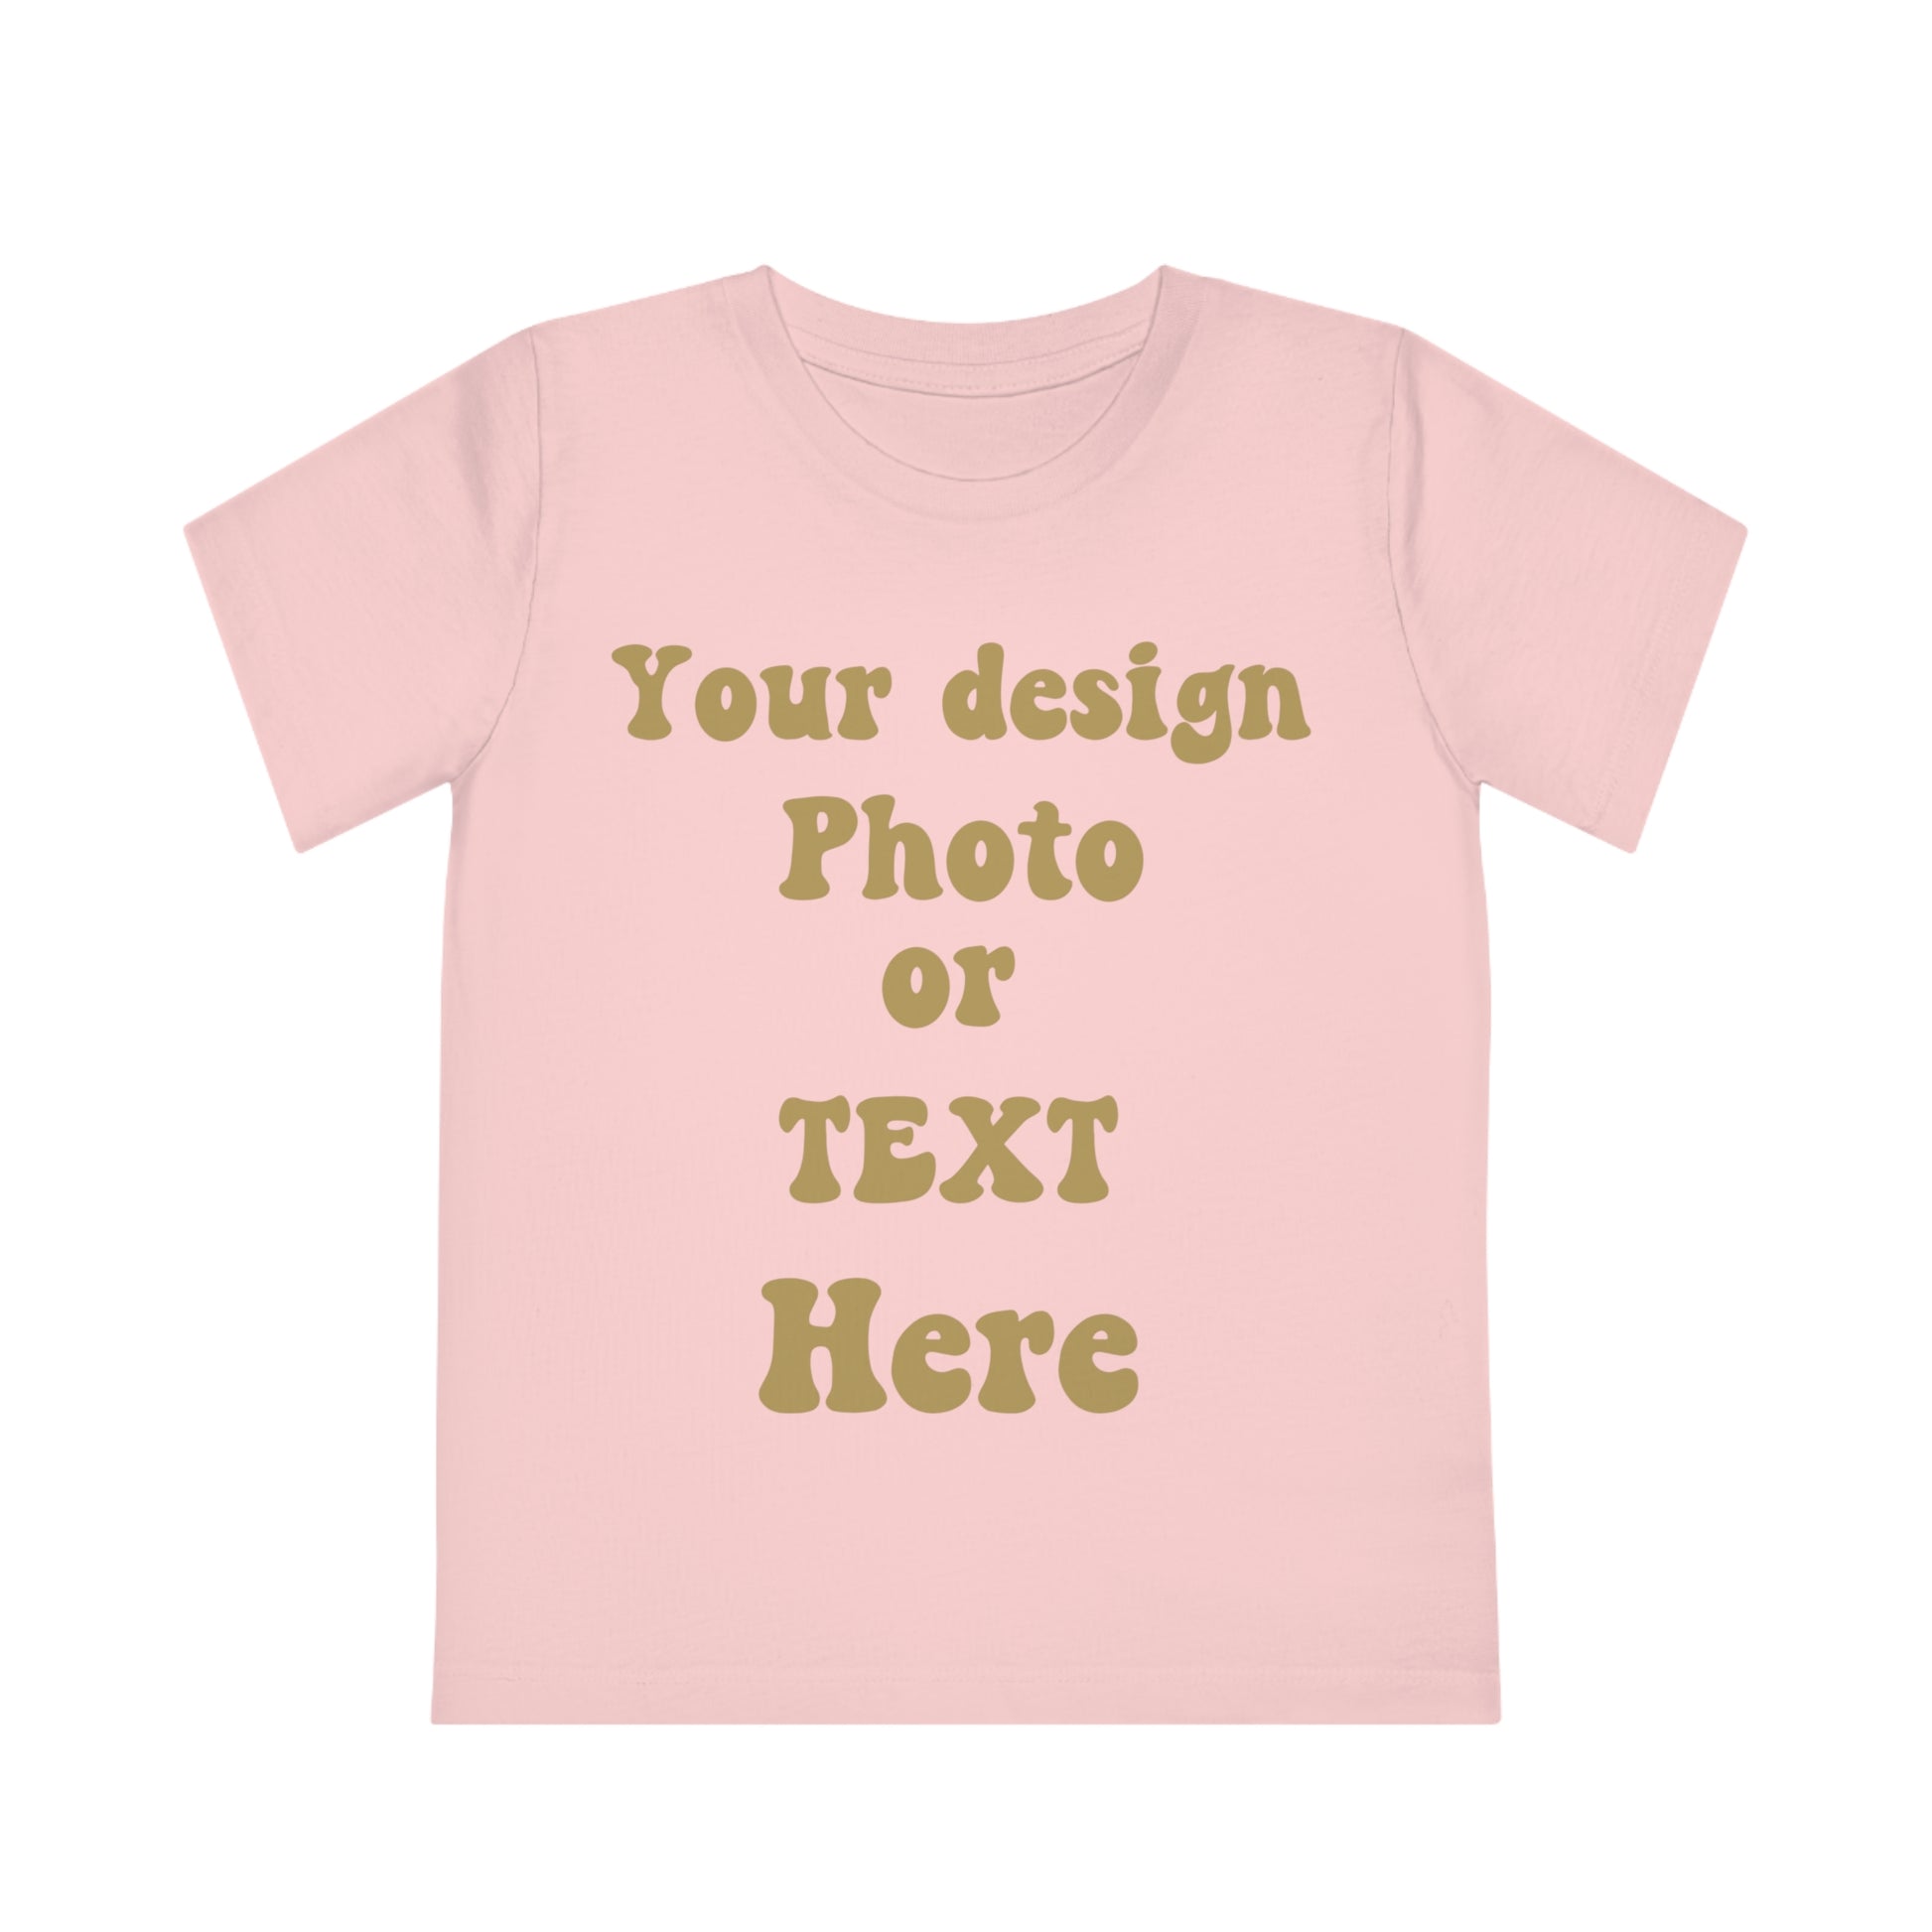 Kids' Personalized T-Shirt - Custom Children's Tee with Your Own Design Kids clothes Cotton Pink 3/4 Years 